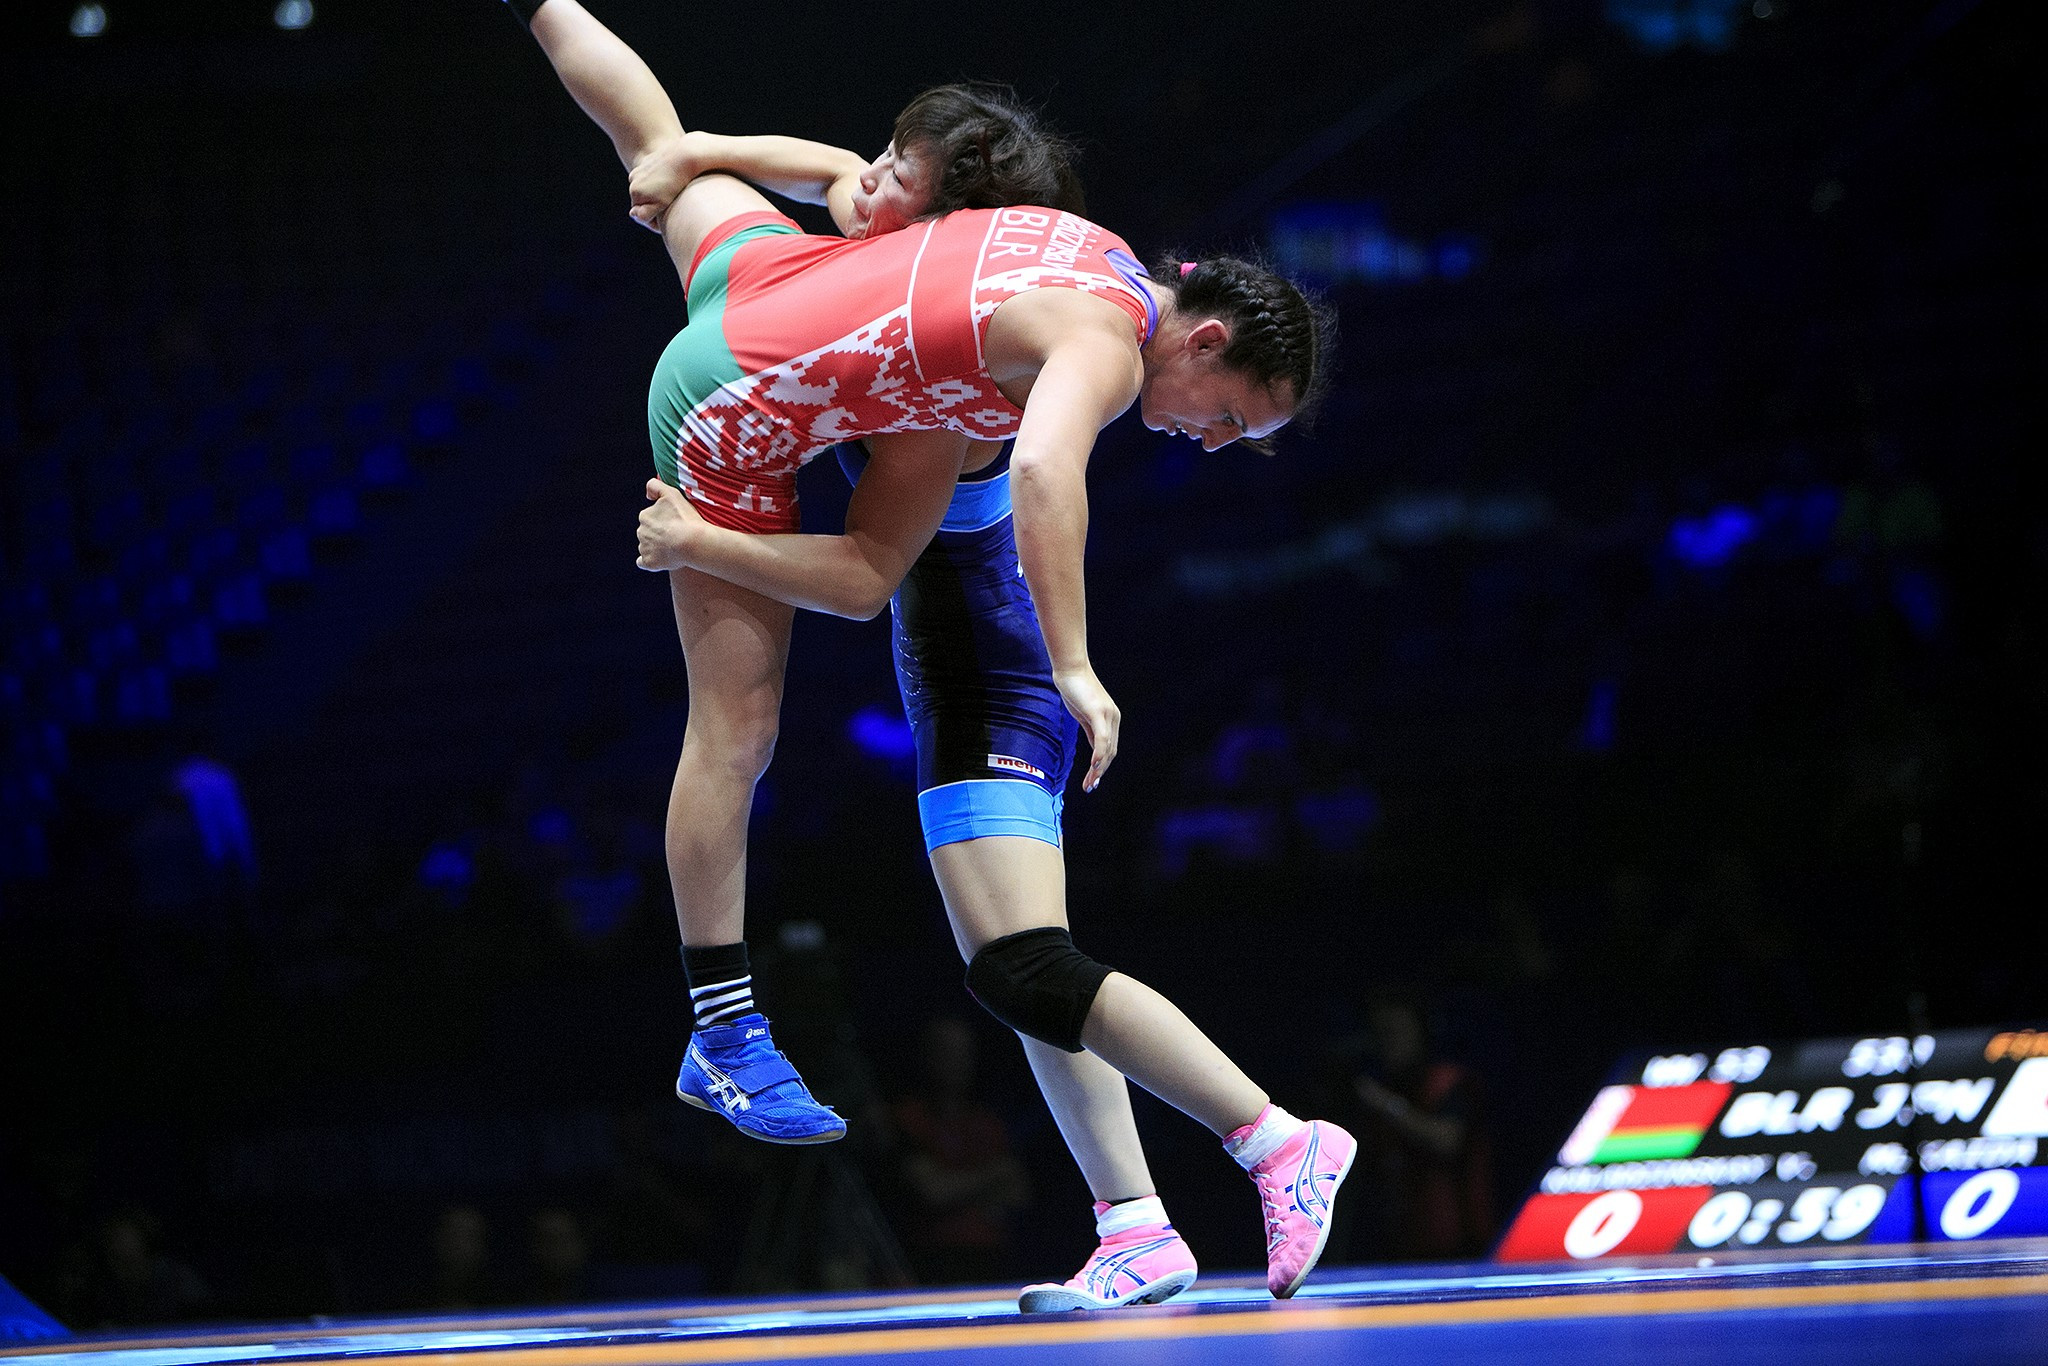 The victory for the Belarusian ended Japanese hopes of a clean sweep on day four ©UWW